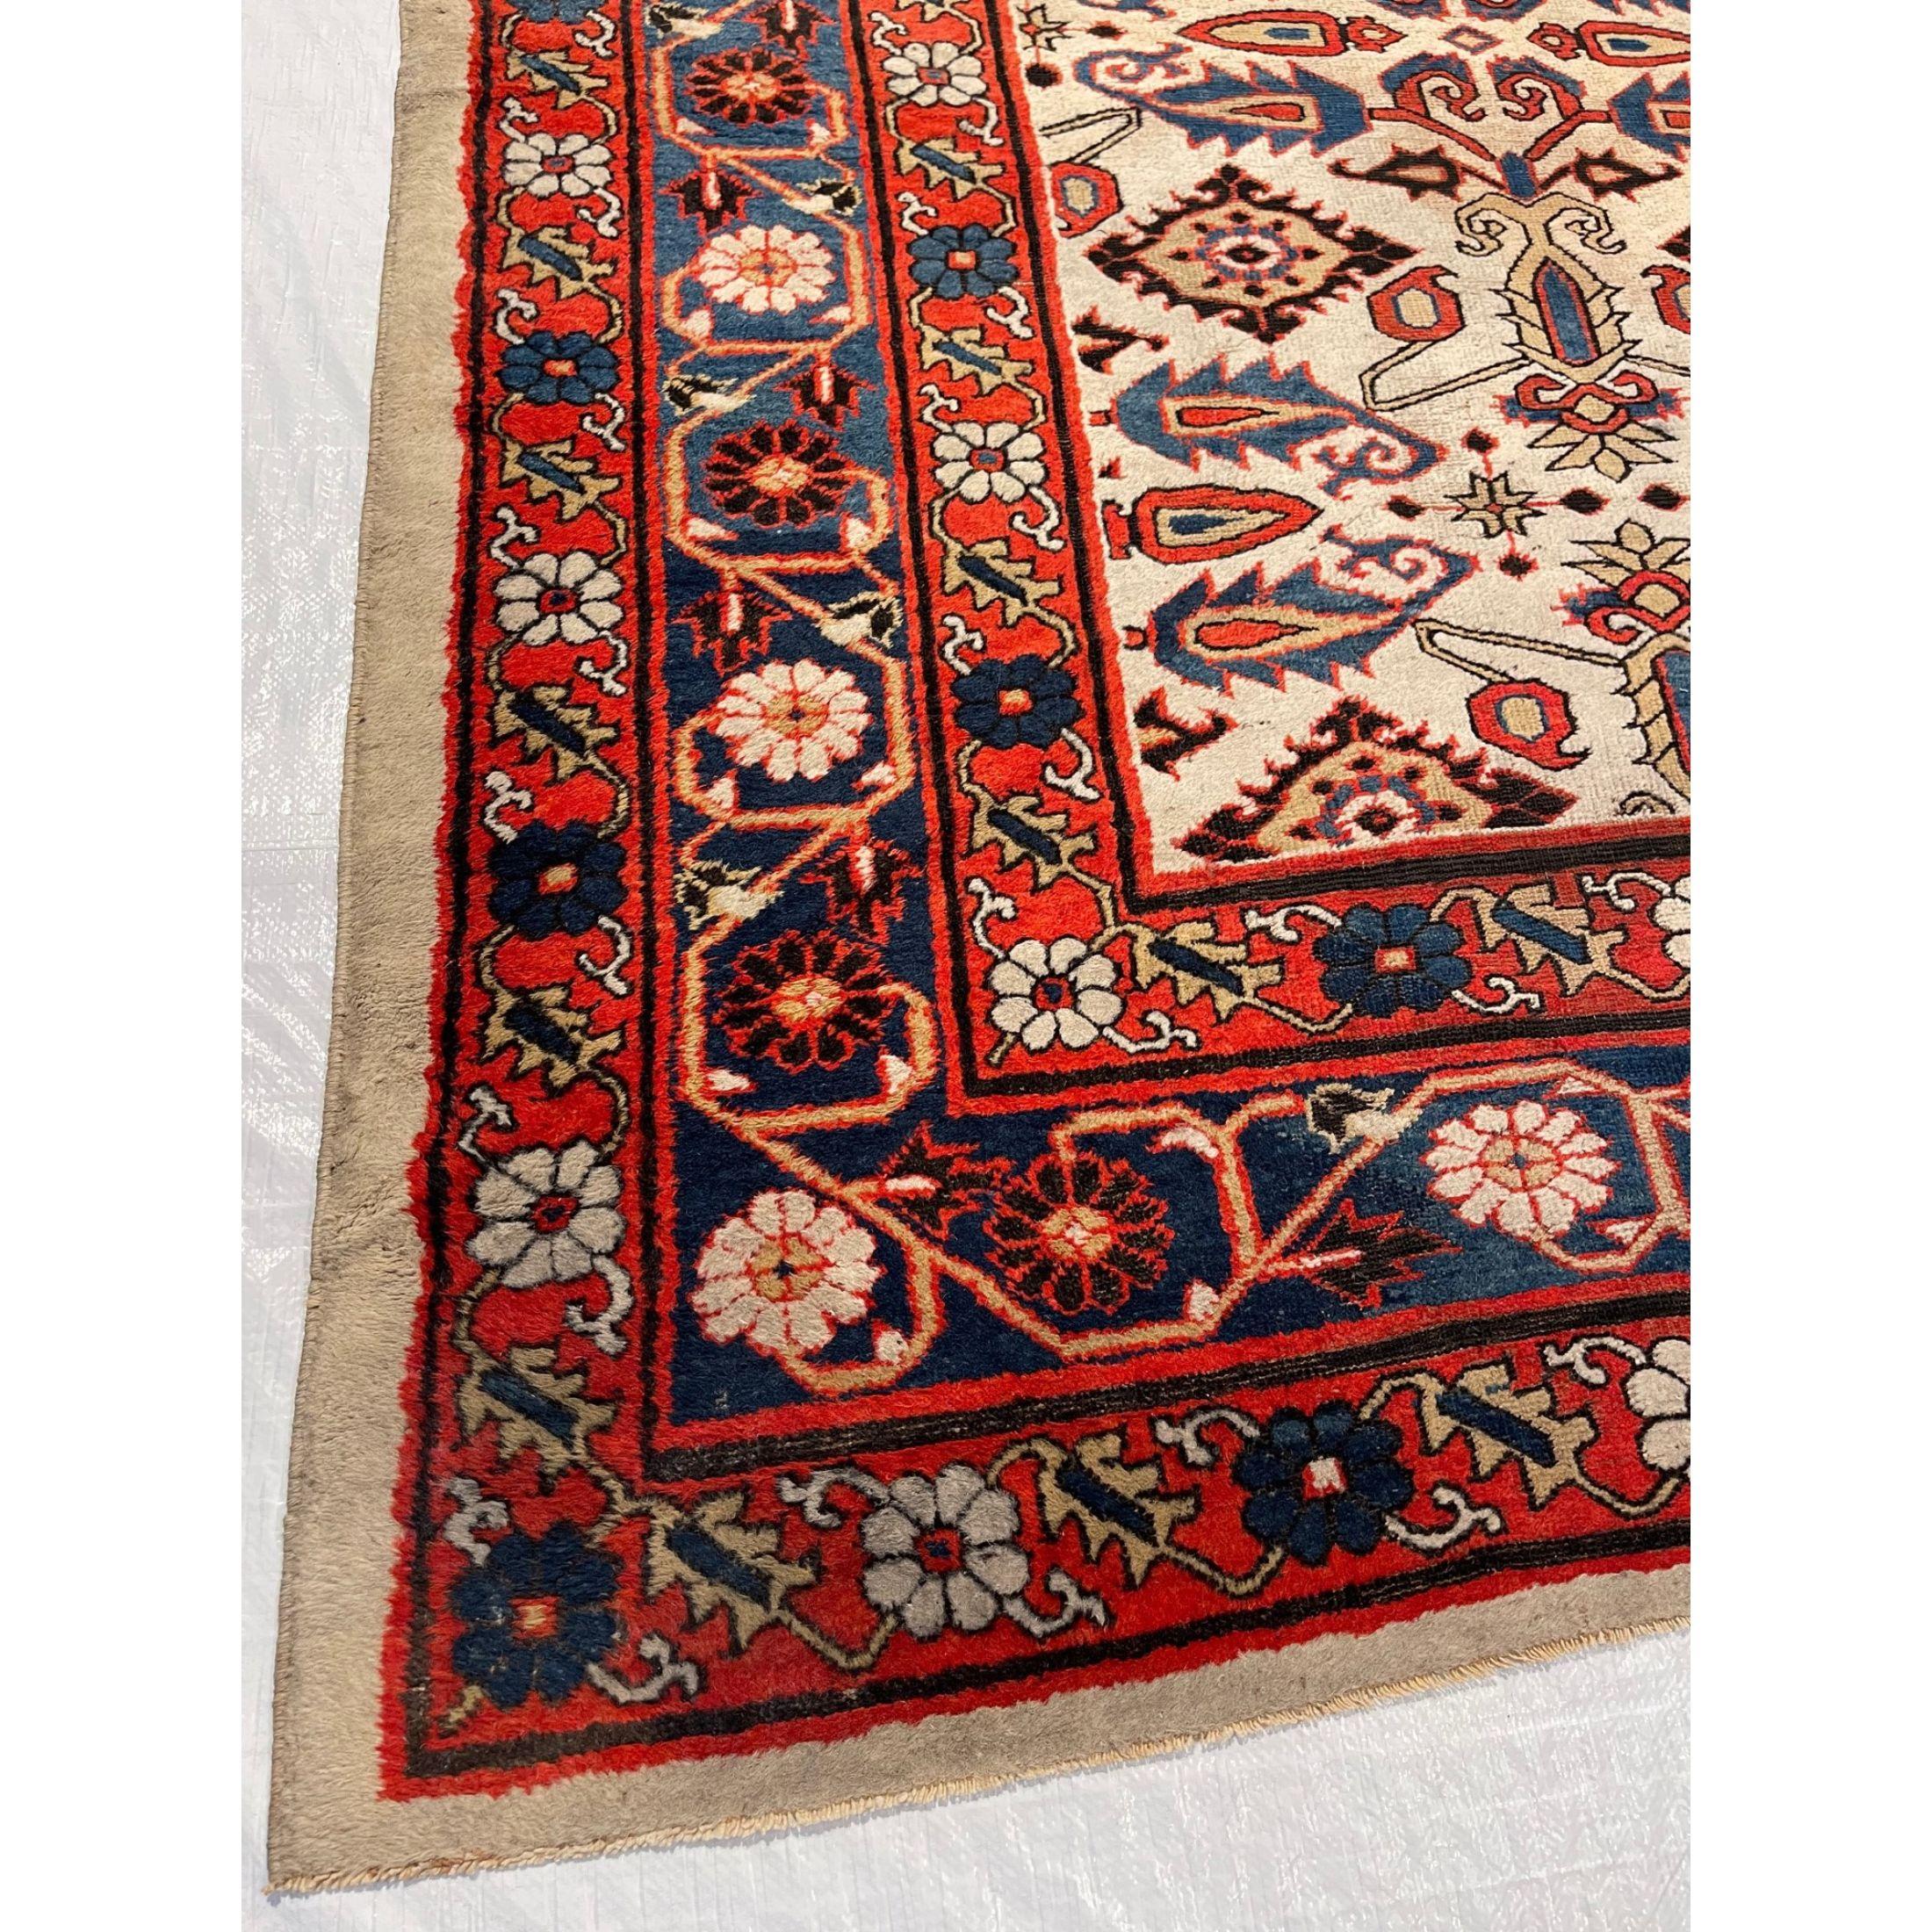 Antique Amritsar Rugs – The spectacular rugs of Amritsar capture the exotic style of India while incorporating a subtle colonial influence. This convergence of eastern and western styles results in an exceptionally alluring appearance that has been